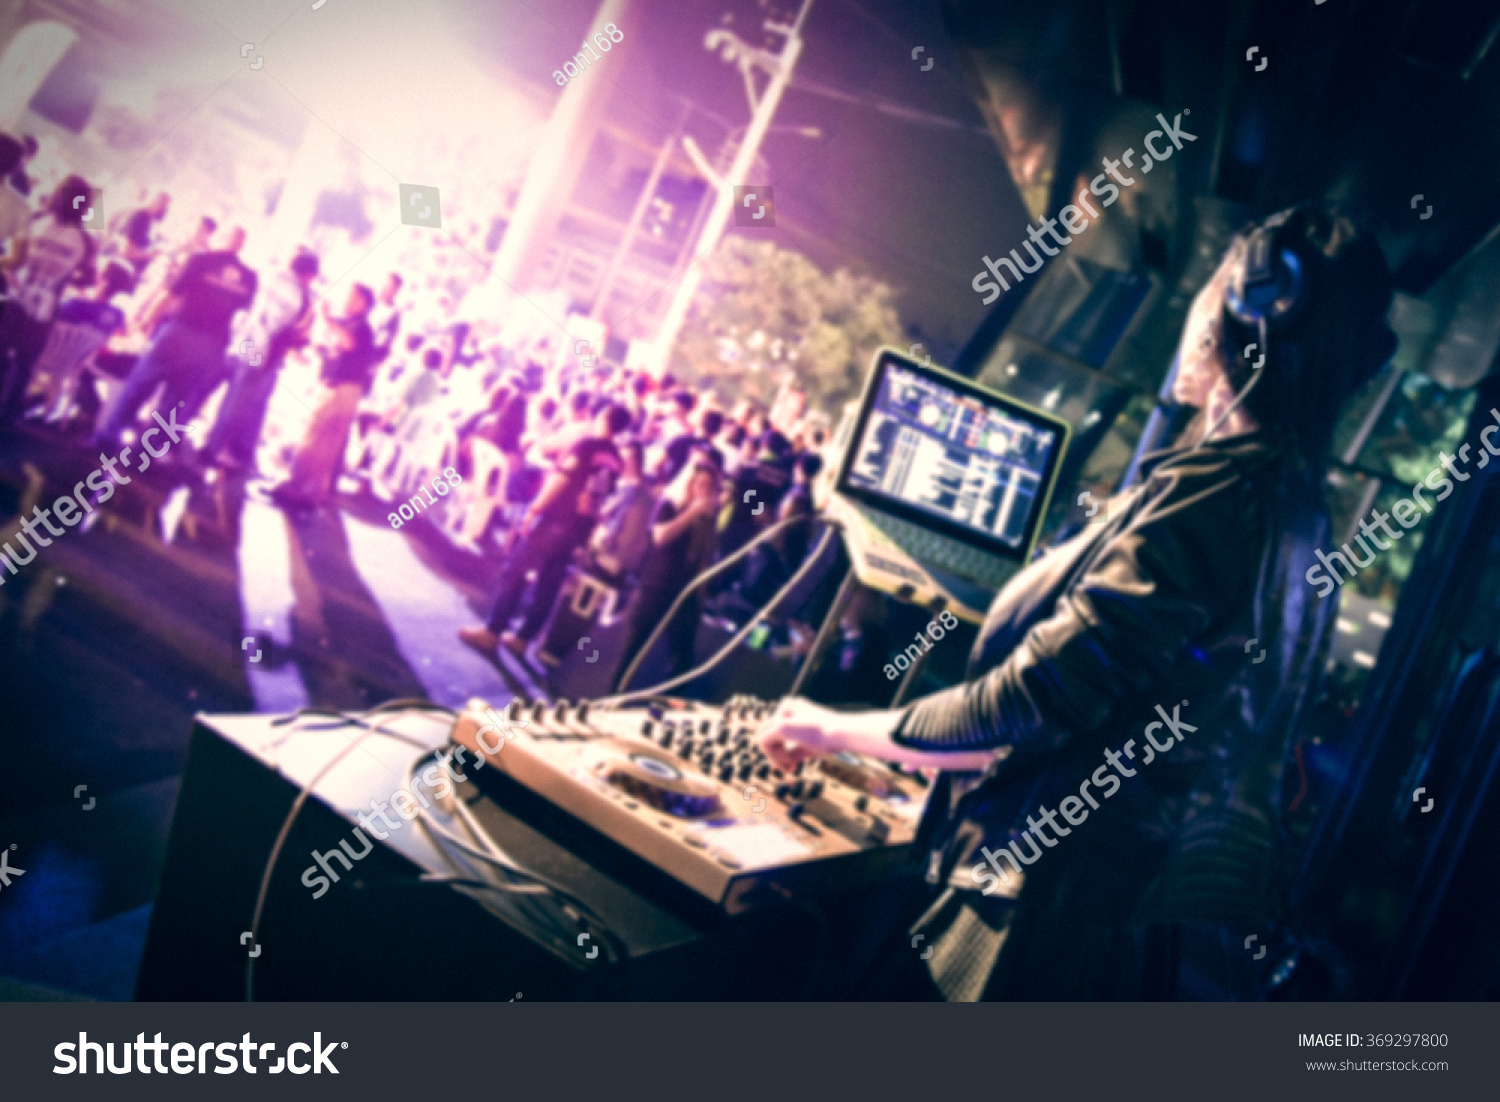 defocus blurred photo background and editable color filter of pretty DJ girl performing at exterior outdoor party #369297800